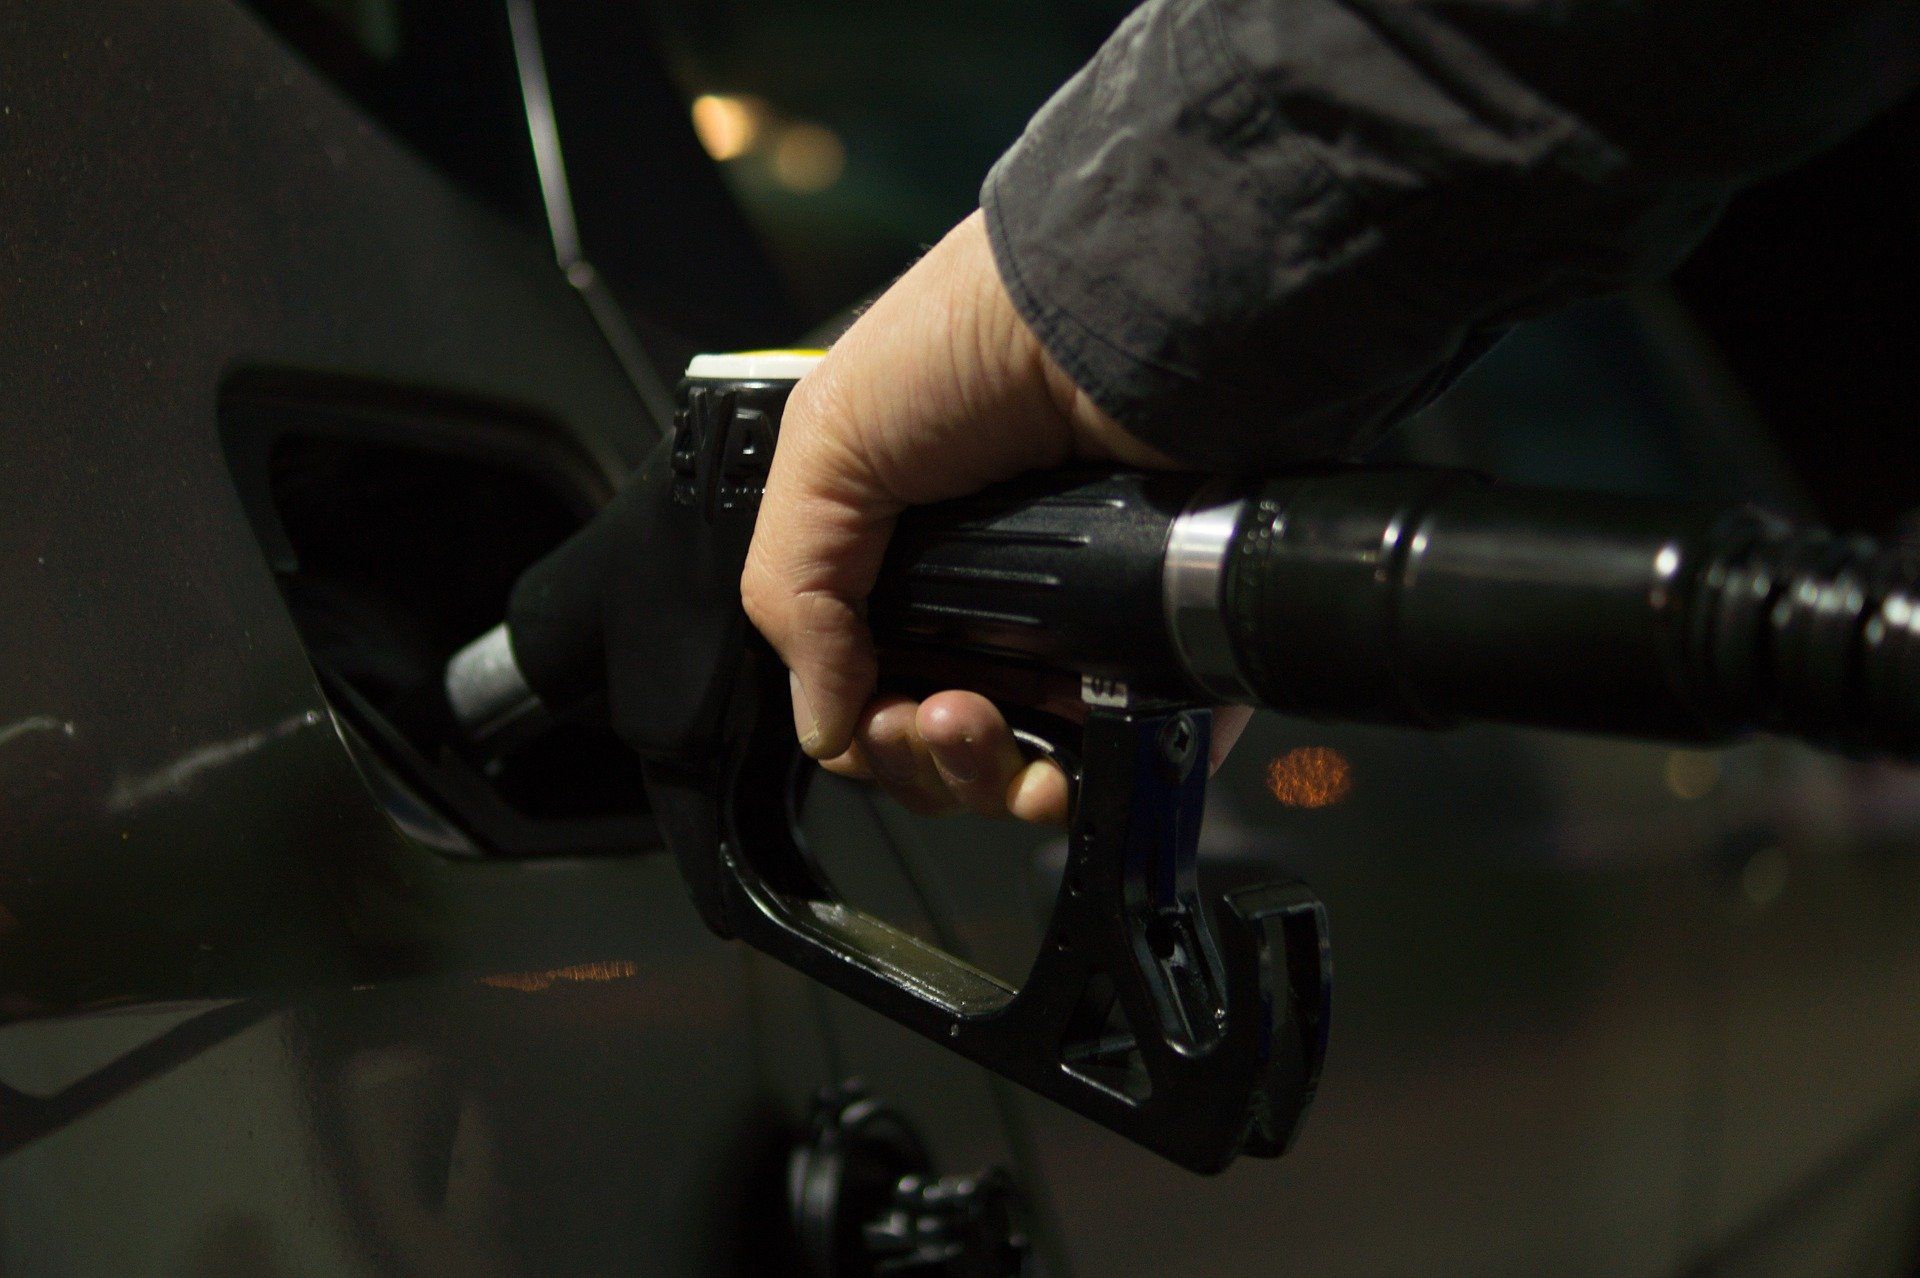 Fuel price today: Petrol and Diesel rates remain unchanged on April 27, 2022